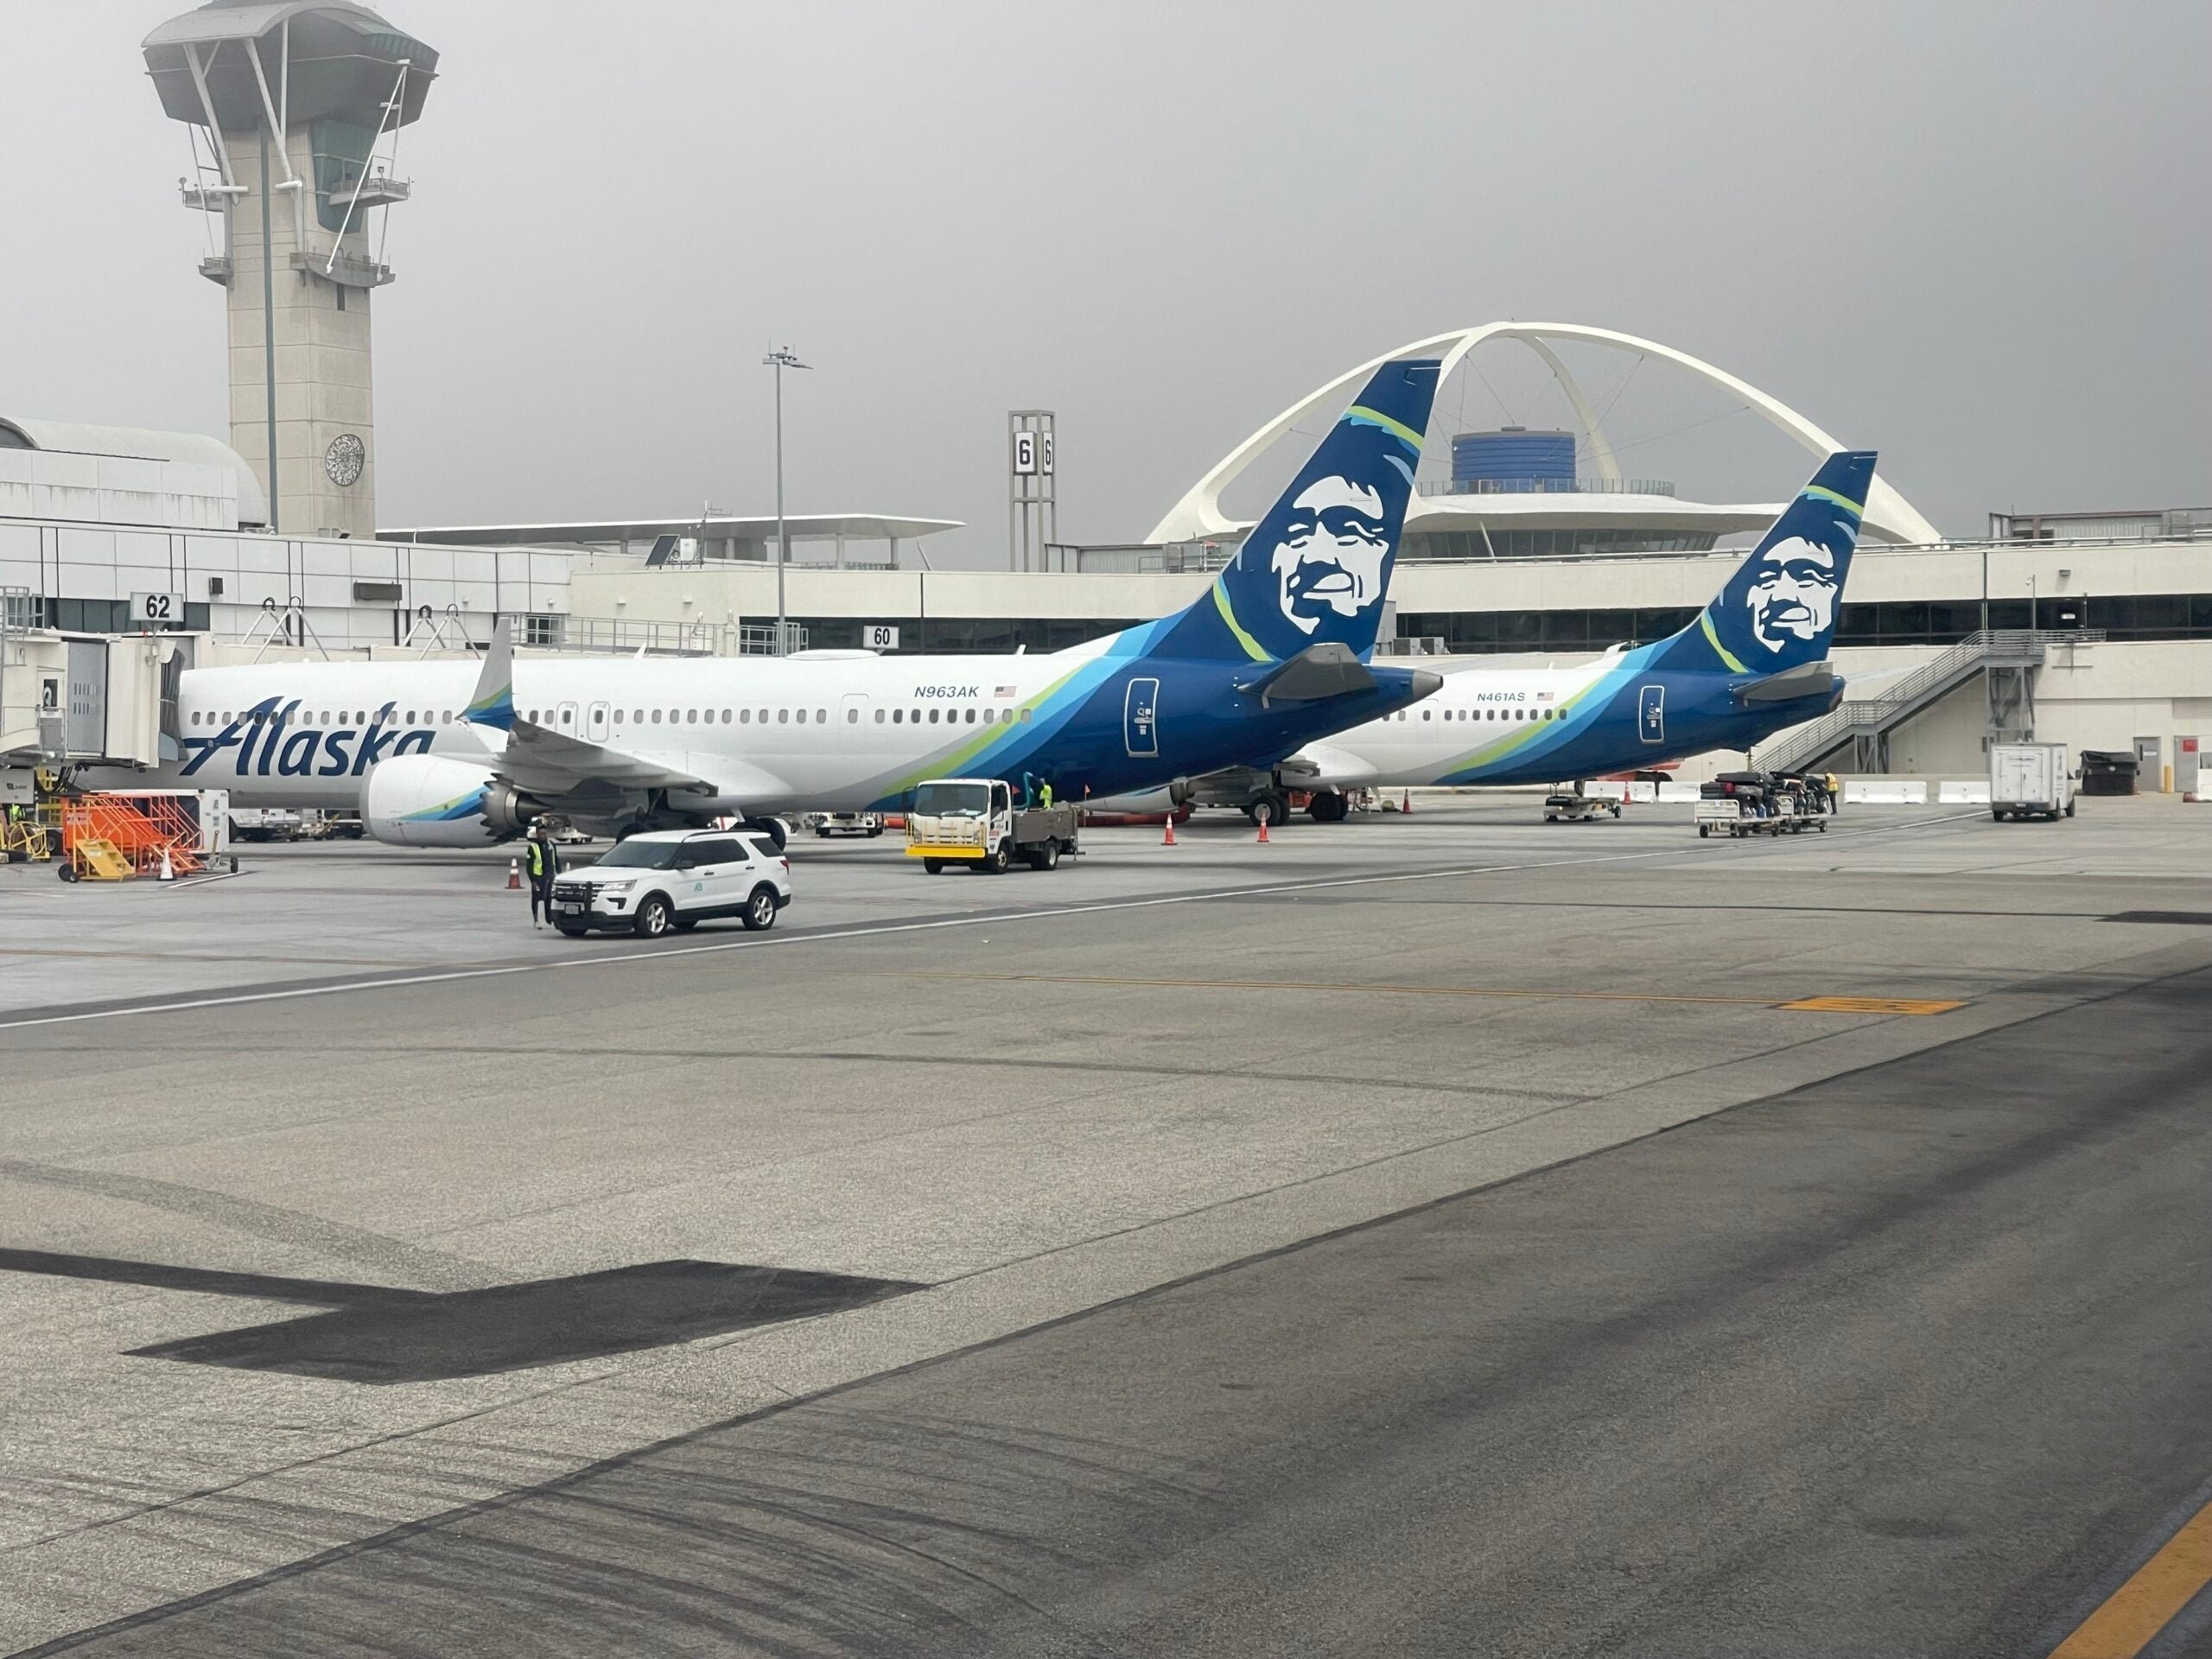 Alaska Airlines to fly only nonstop route between Nashville and Portland, Oregon